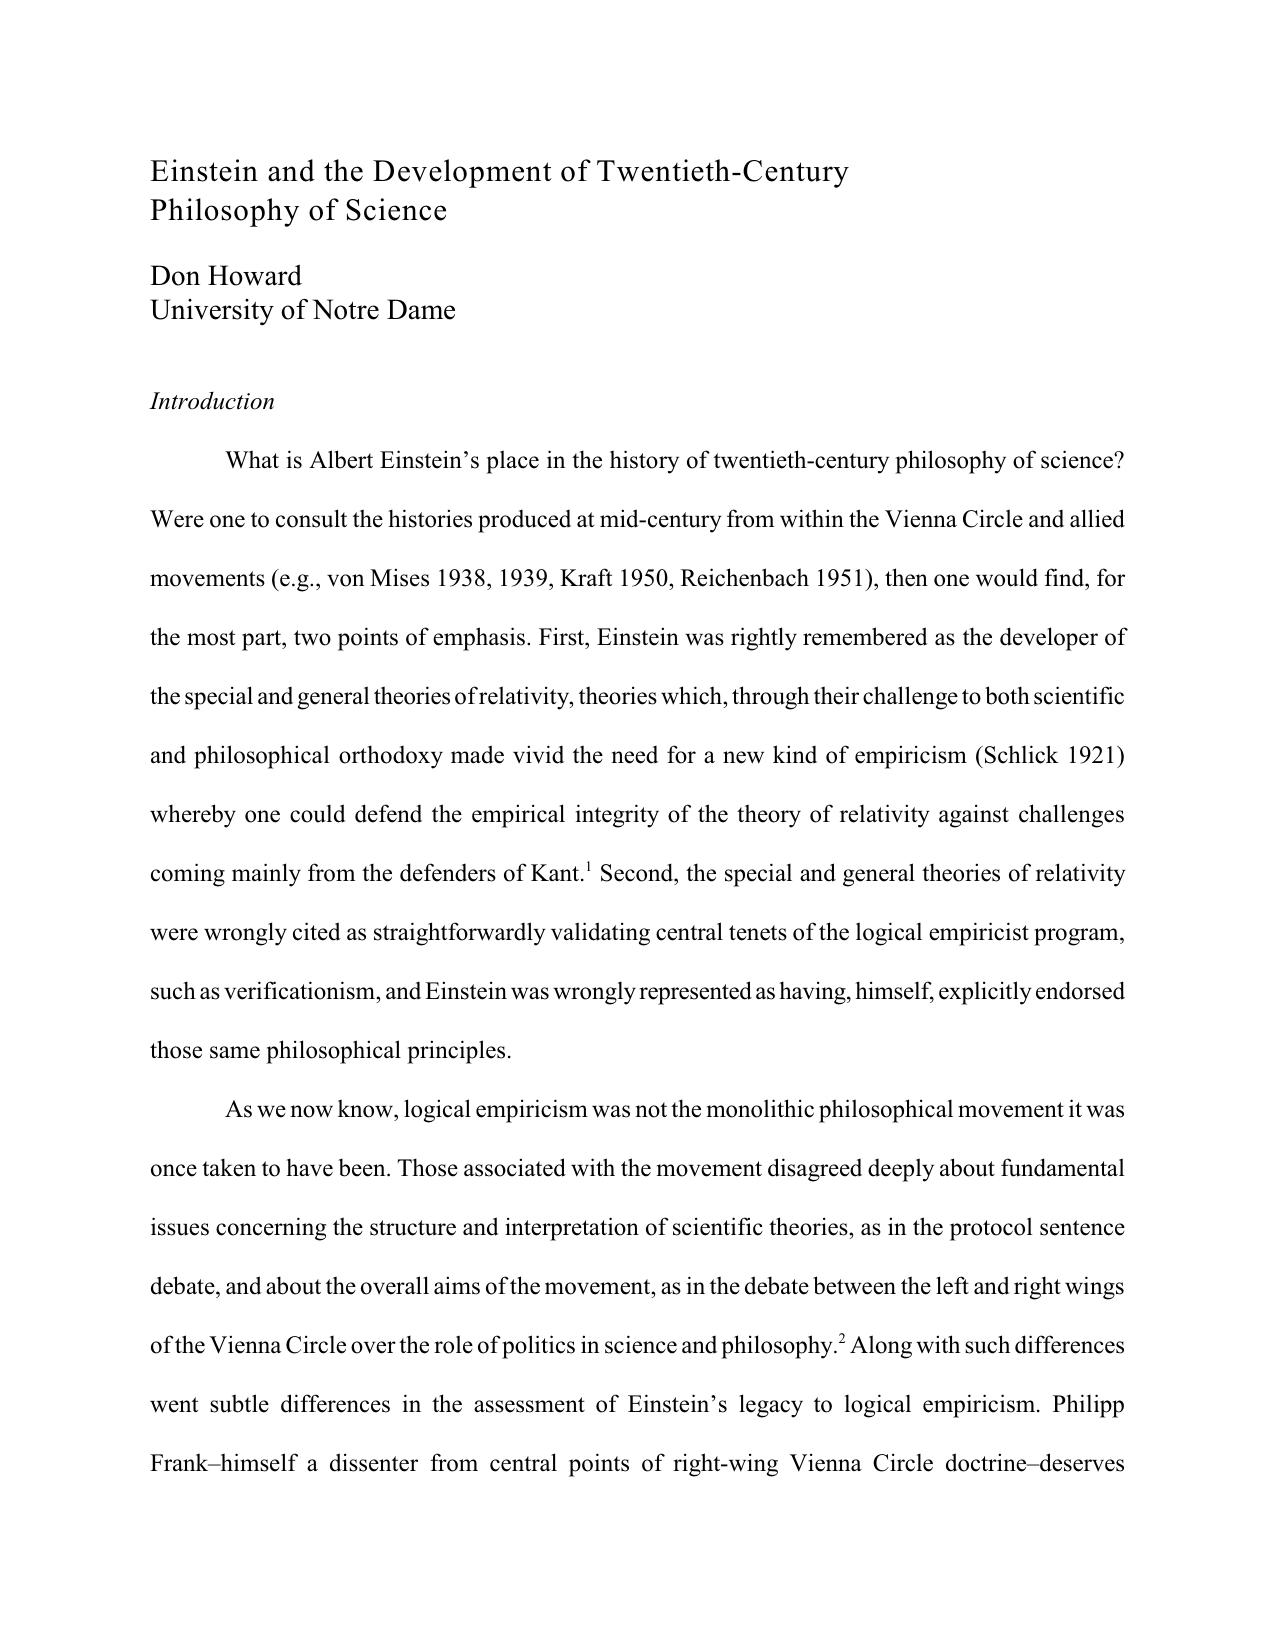 Einstein and the philosophy of science - Paper